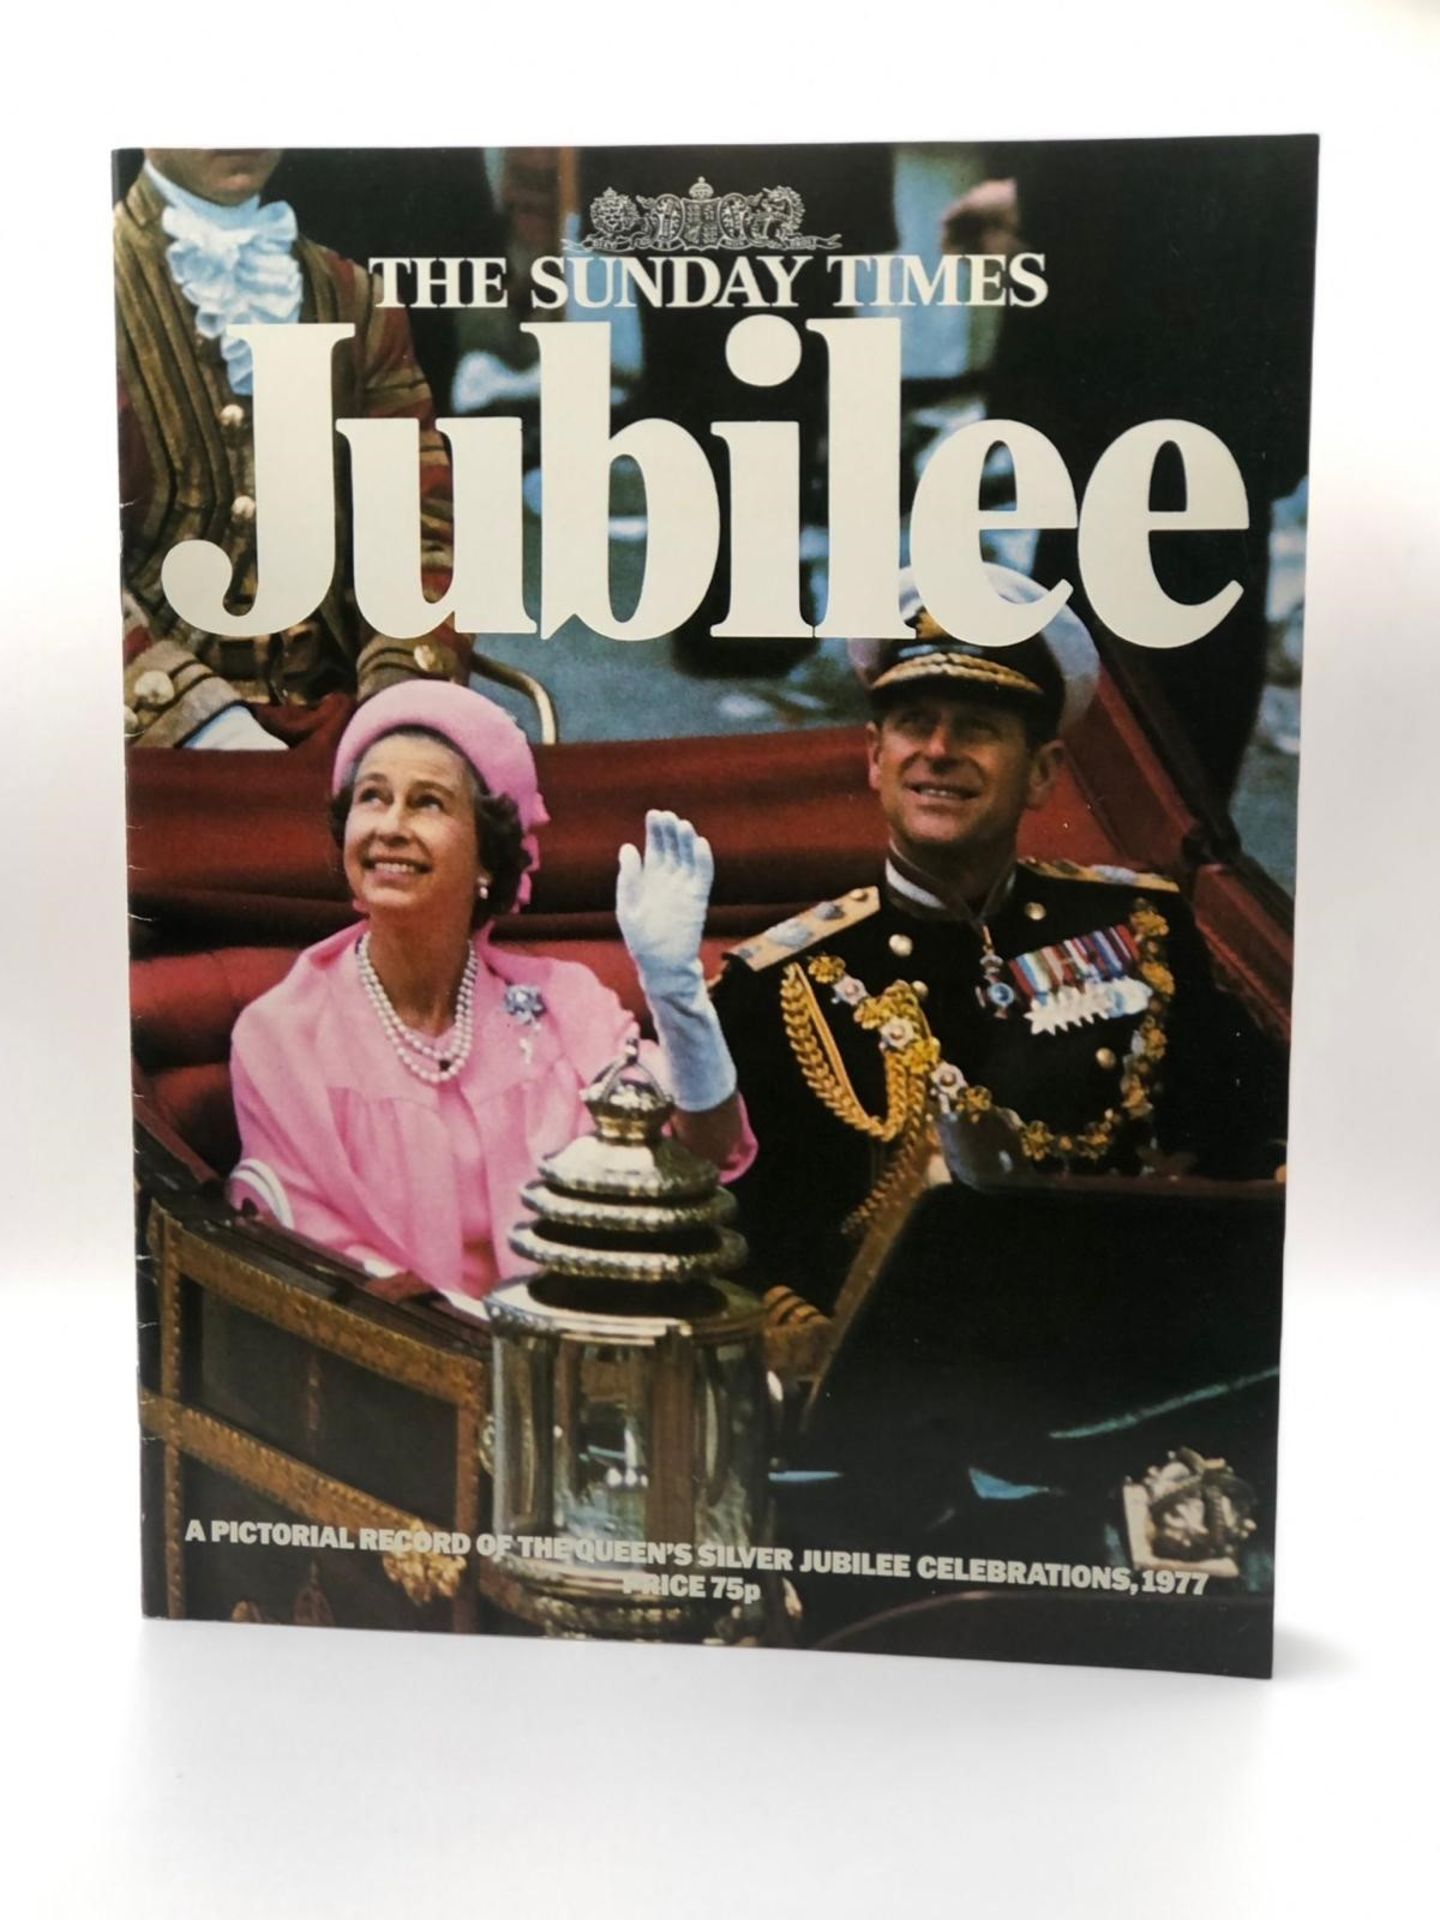 Royal Family Memorabilia, The Sunday Times, Jubilee a Pictorial Record of the Queen's Silver Jubi... - Image 4 of 4